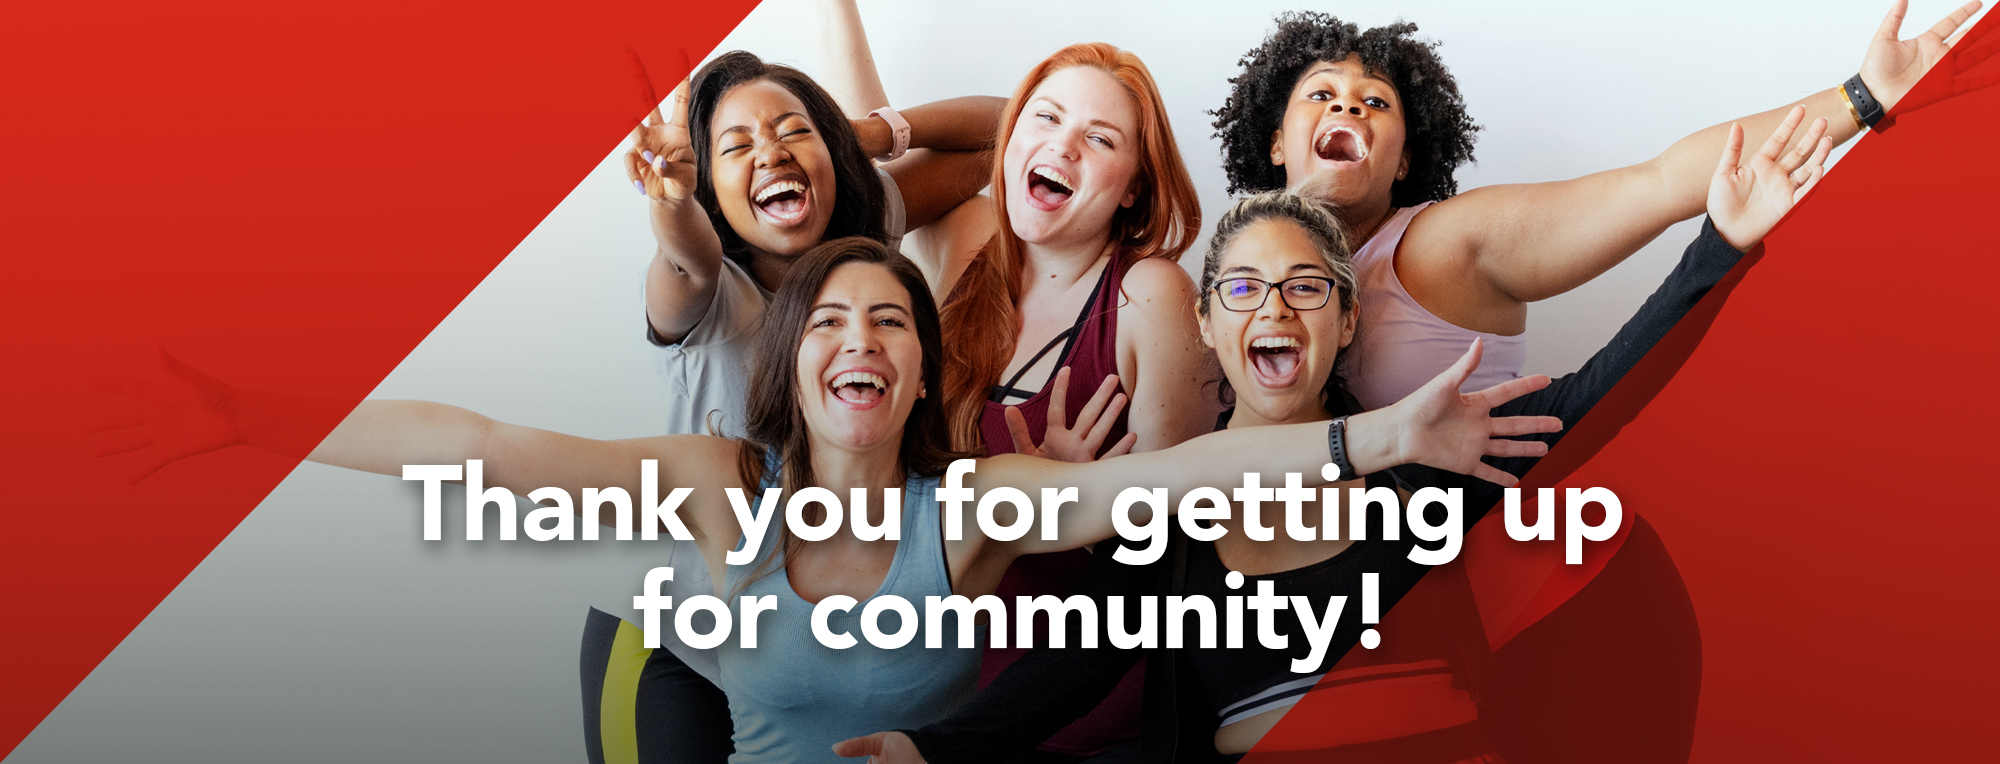 Thank you for getting up for community!